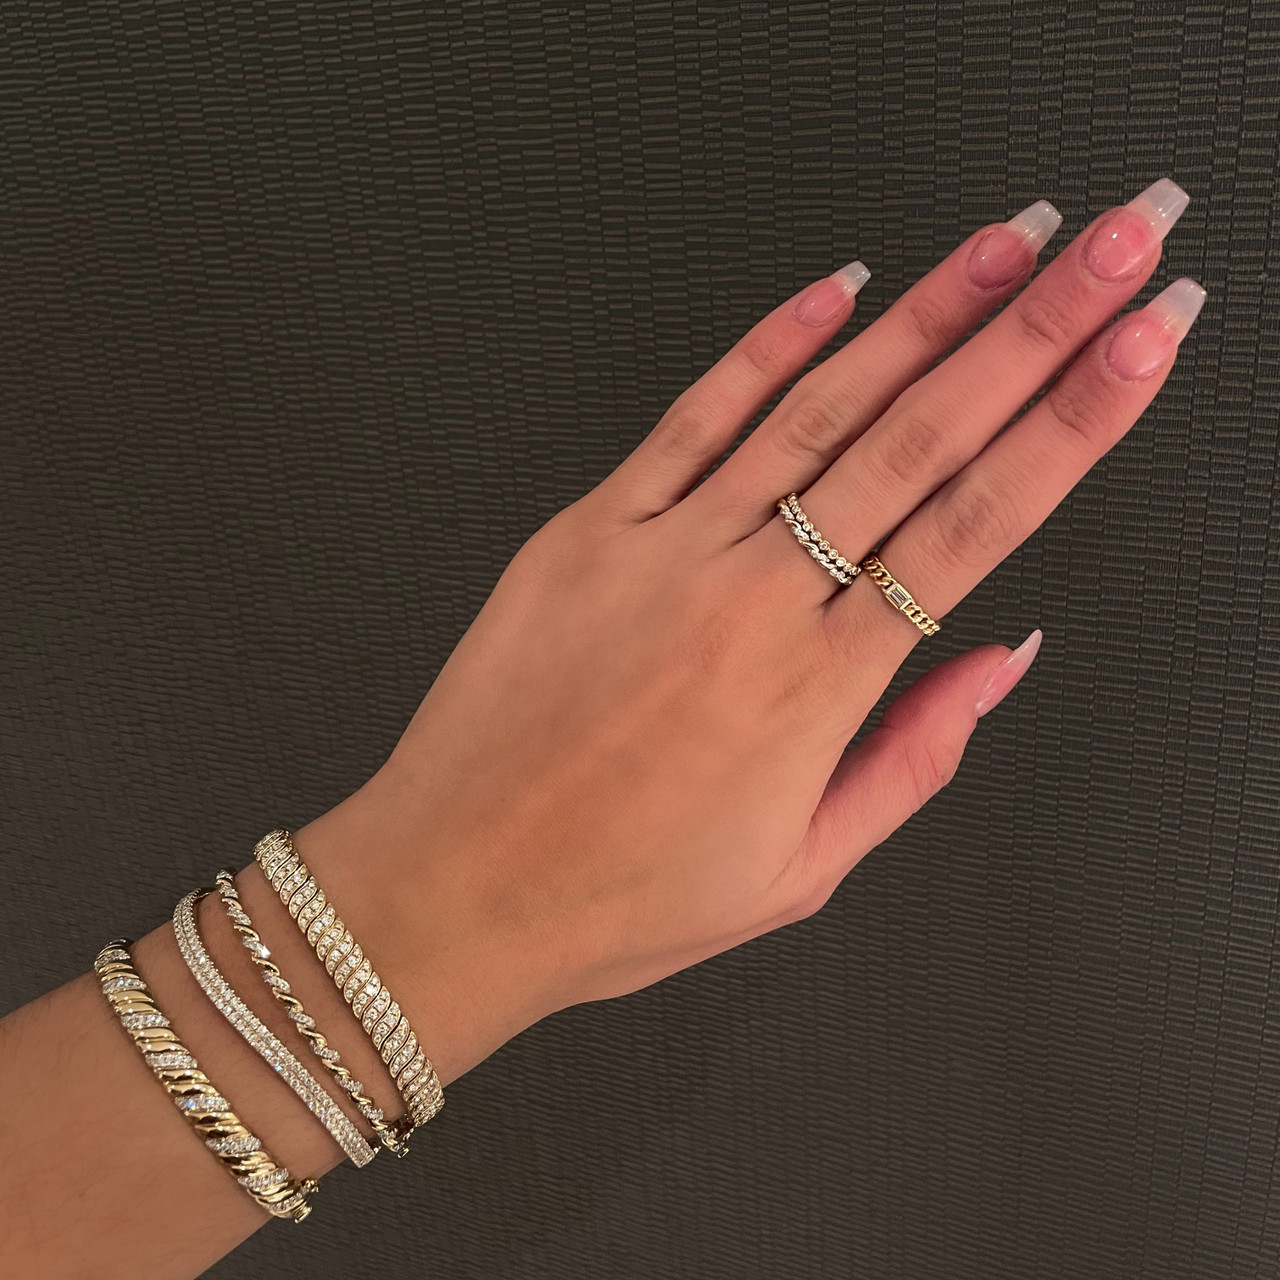 lui jewelry snake chain bracelet ルイジュエリー - ブレスレット